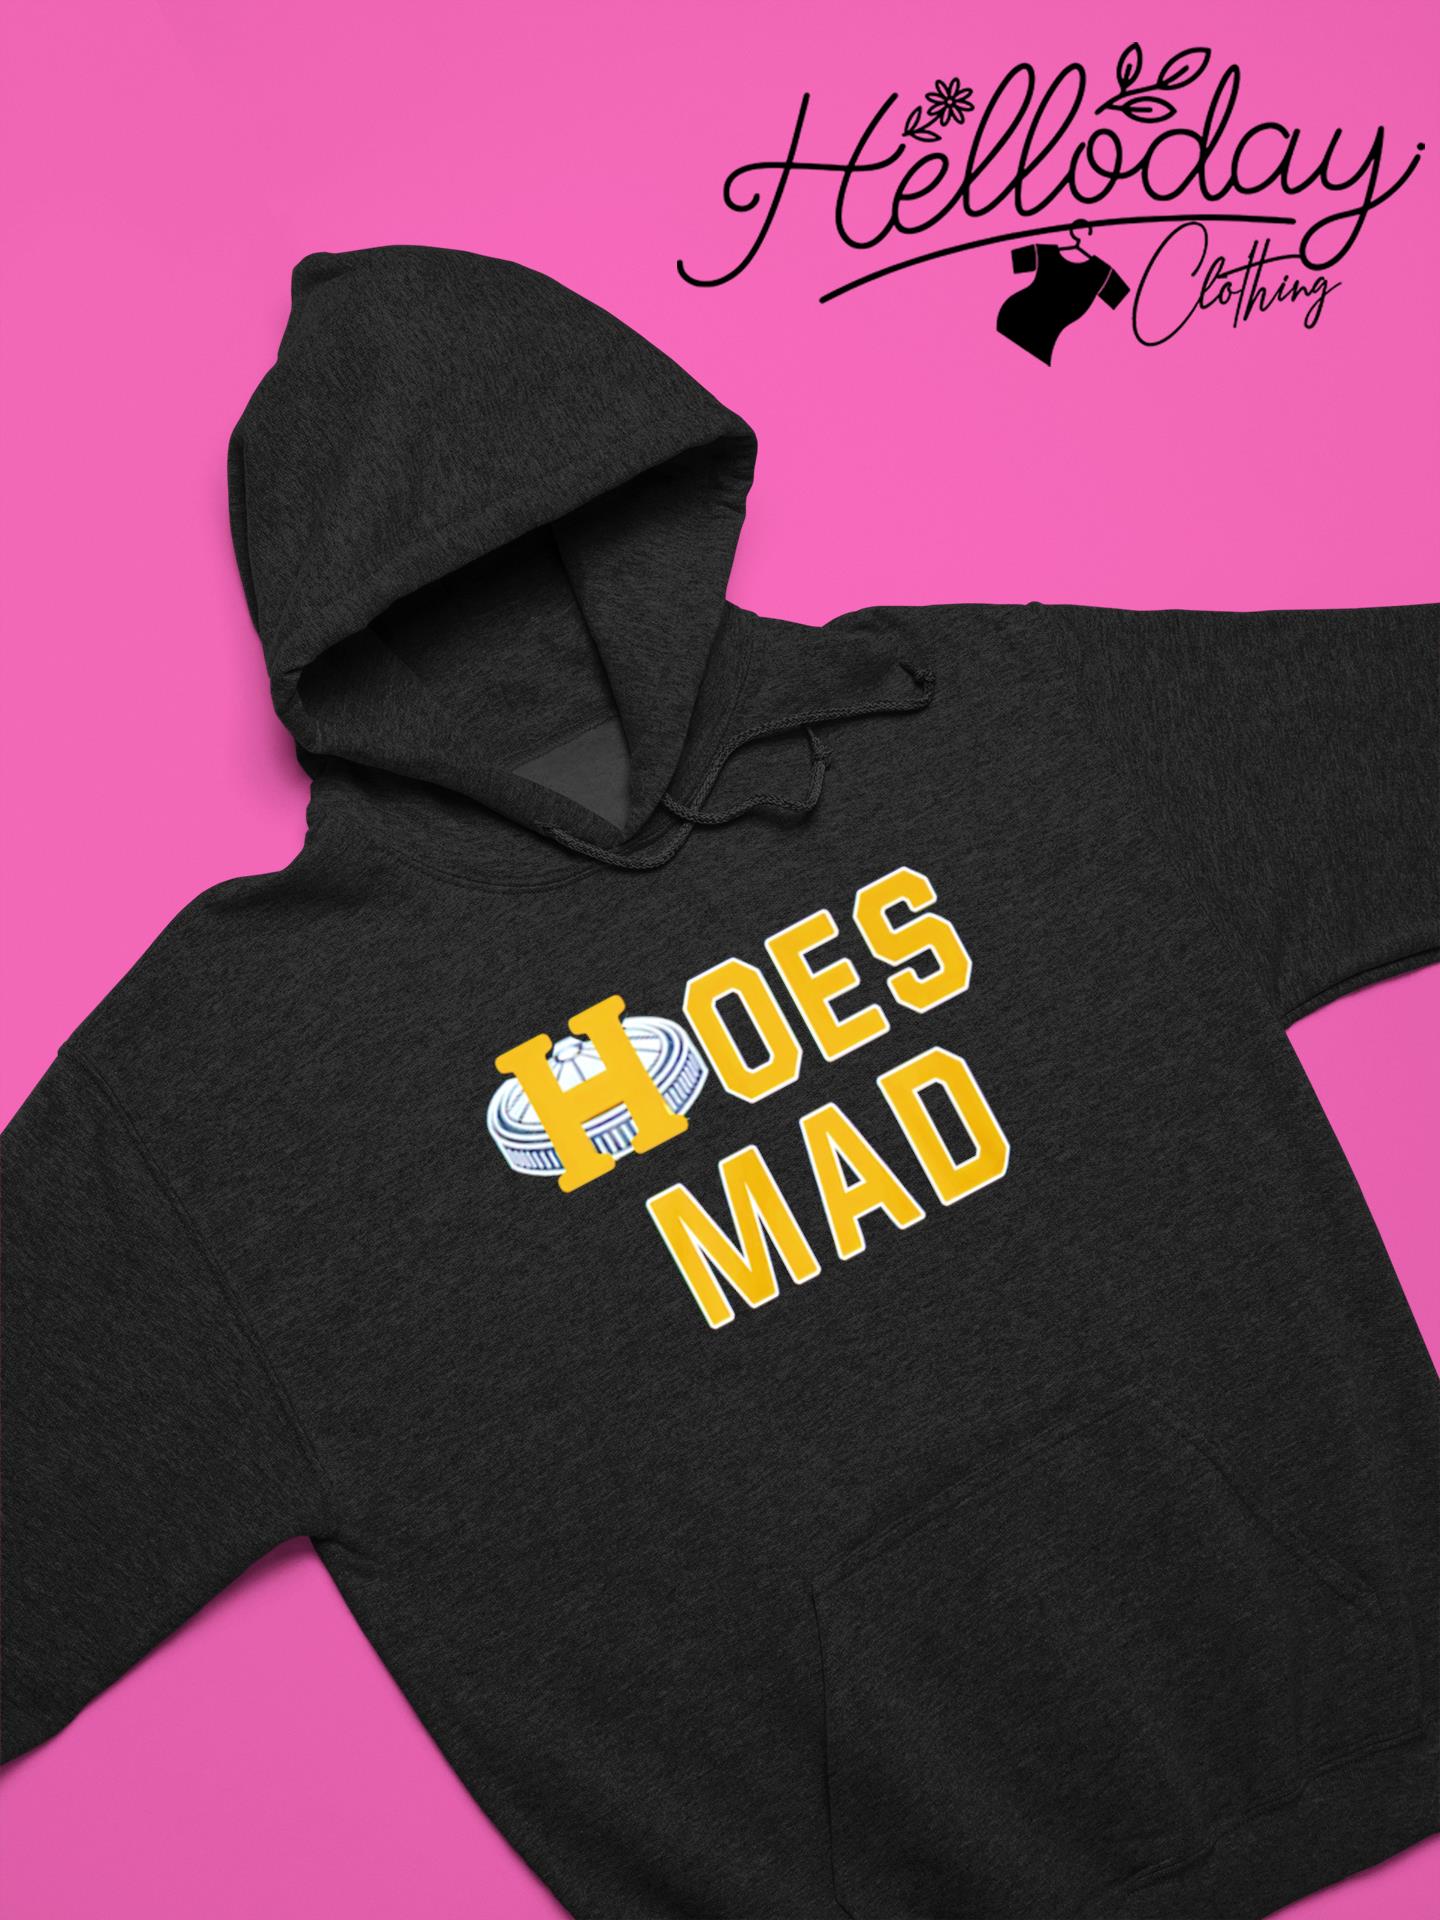 hoes mad astros shirt